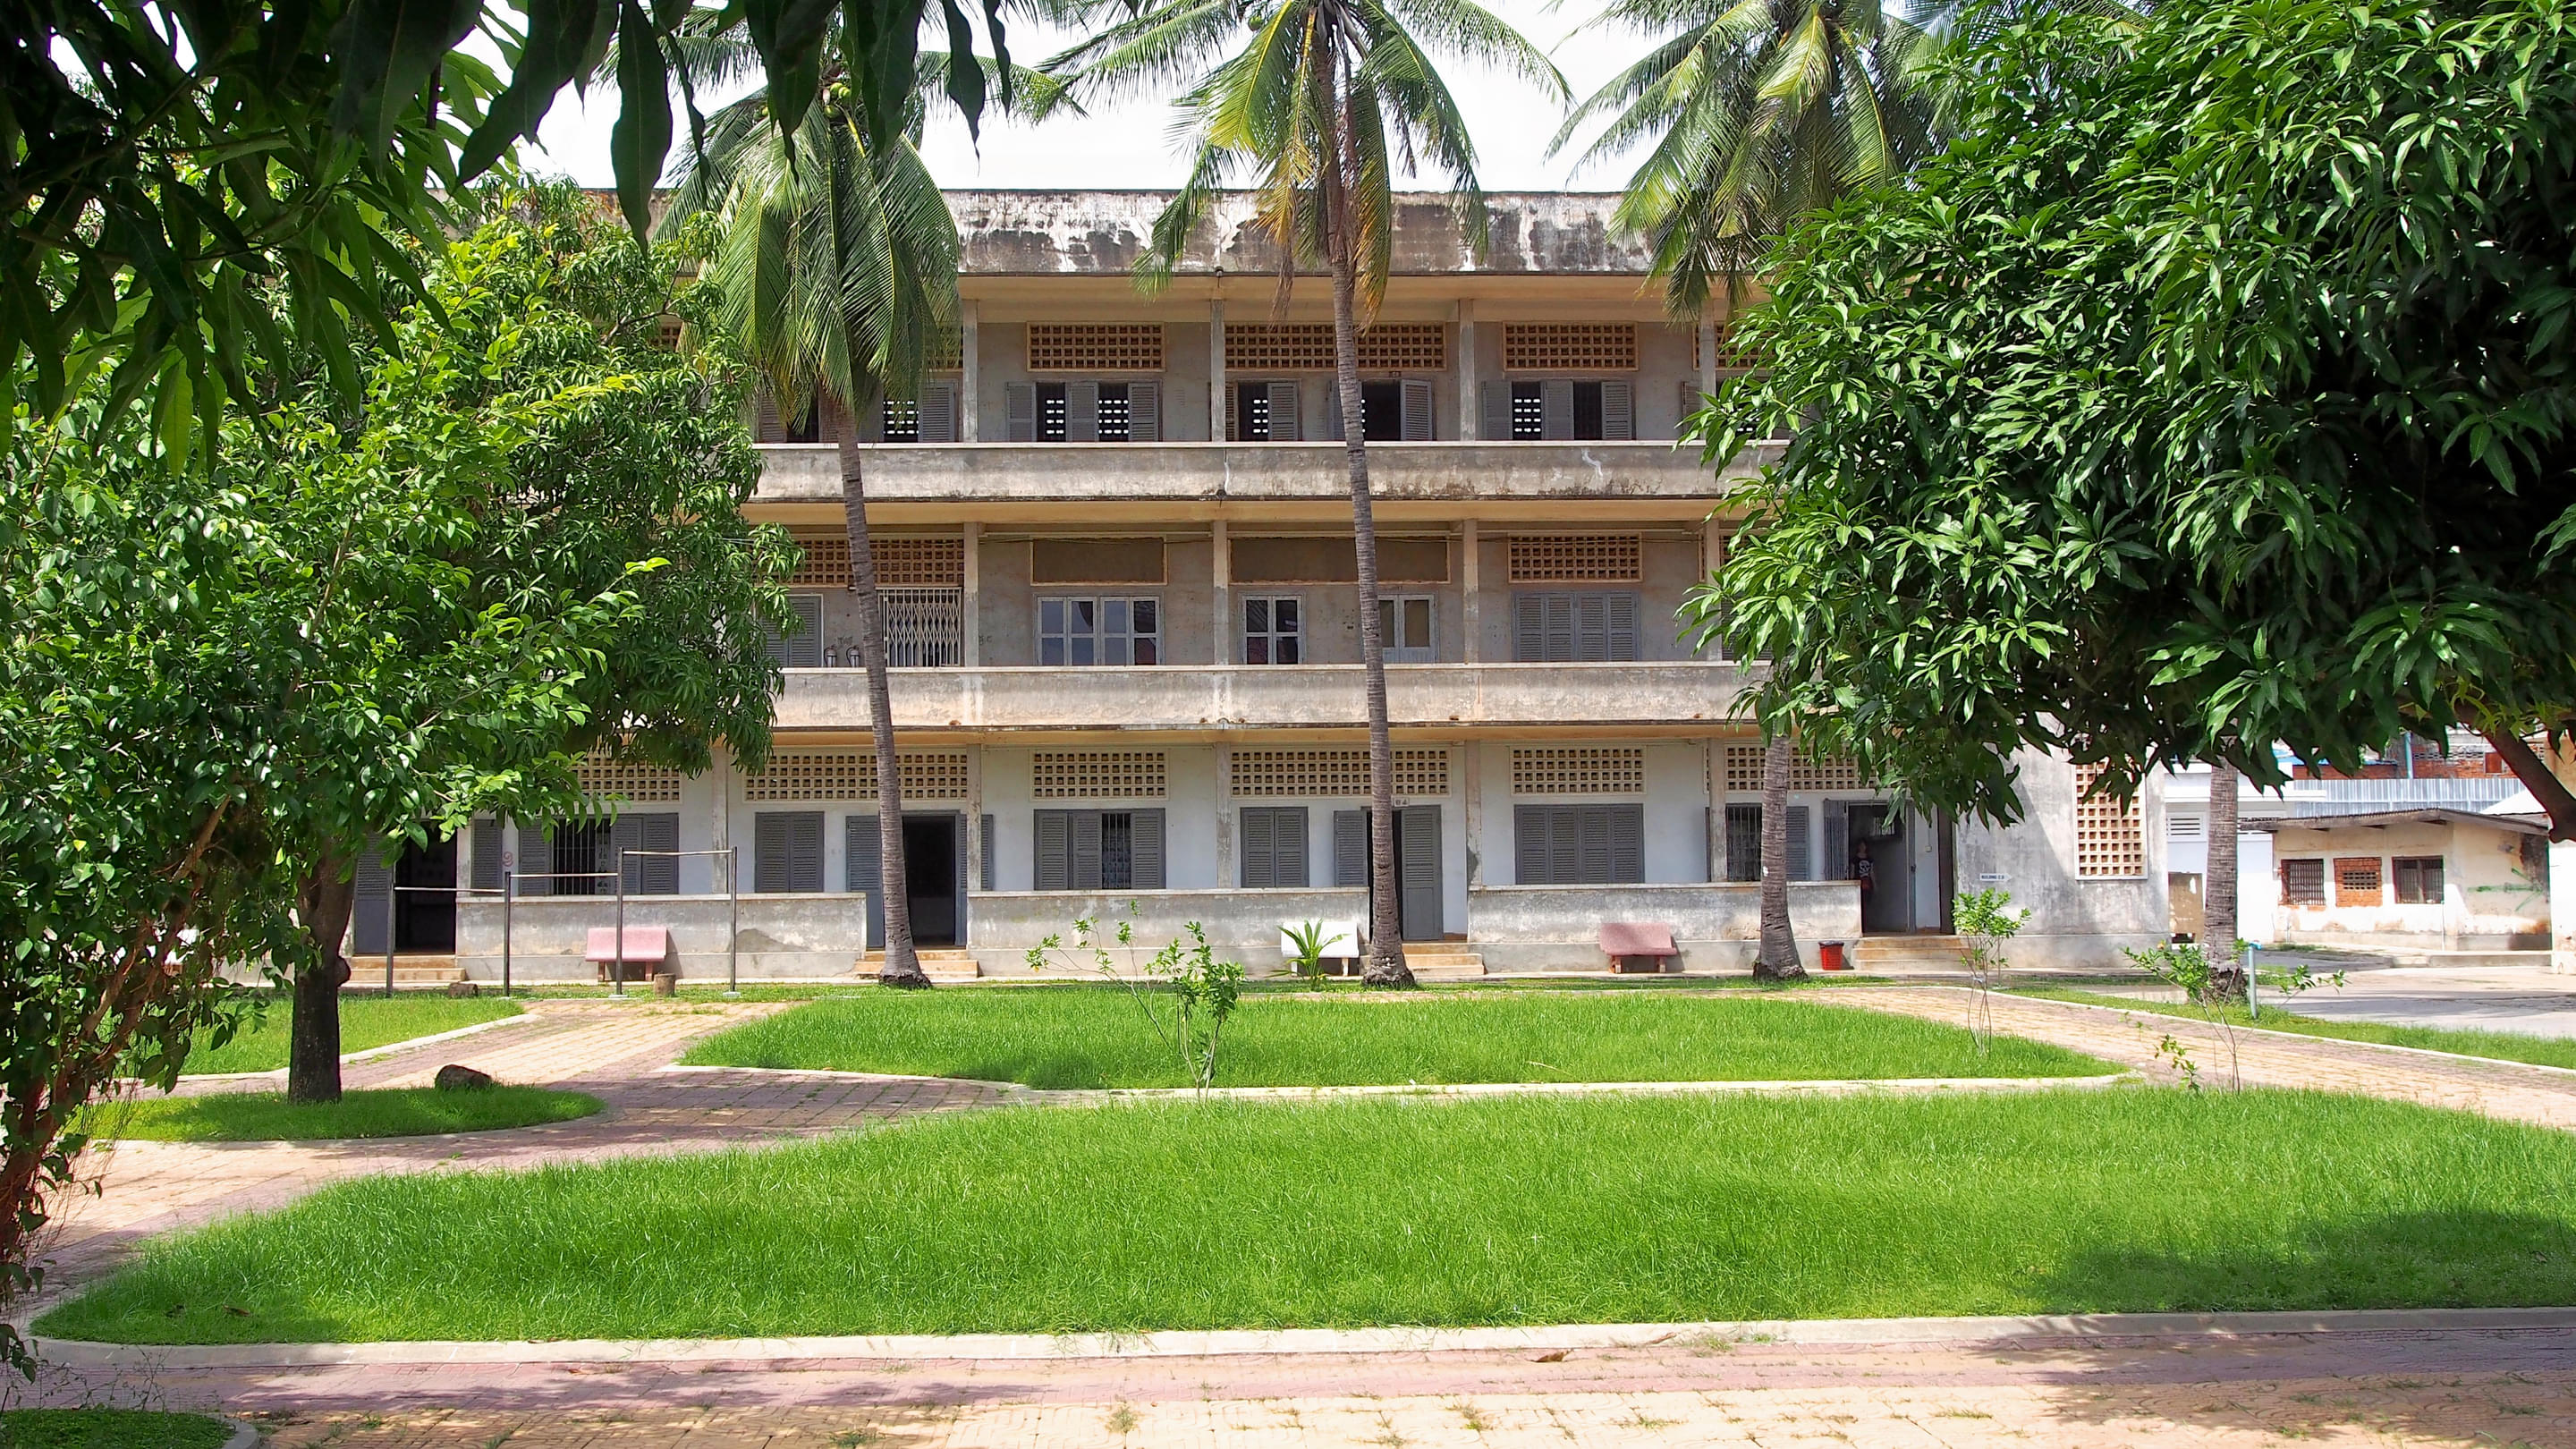 Tuol Sleng Museum Overview